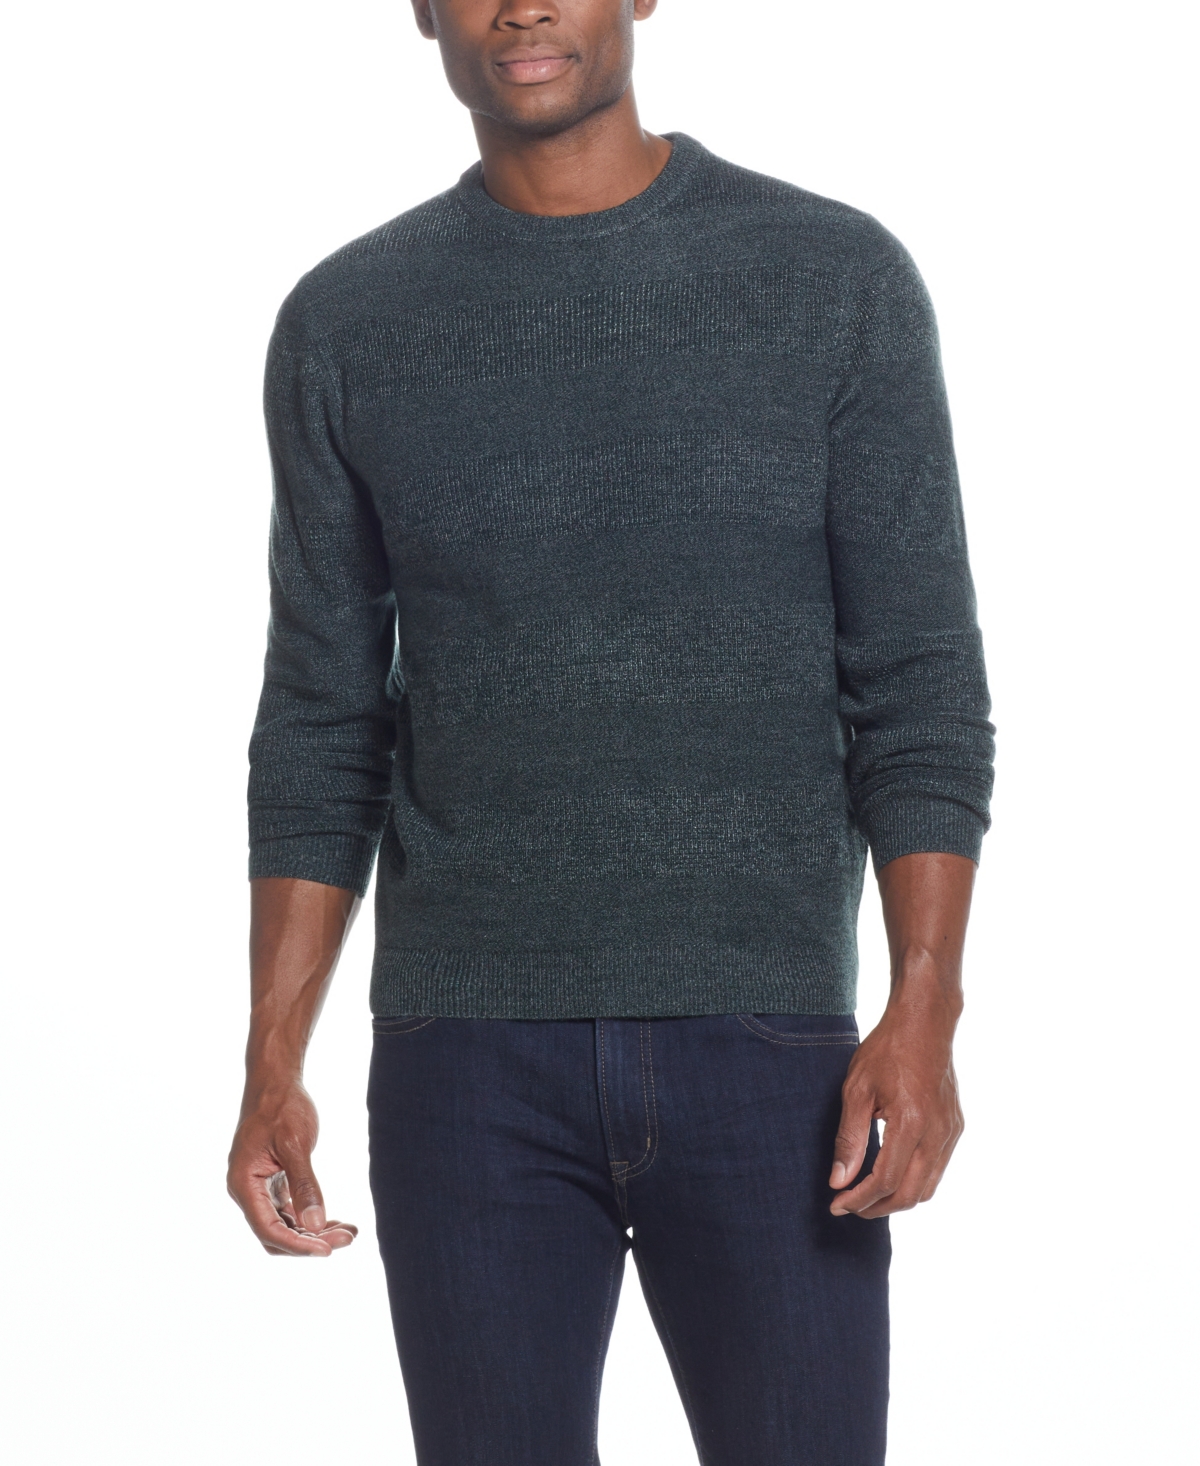 Weatherproof Vintage Men's Soft Touch Crew Neck Sweater (5 Colors) $13.96 + Free Shipping on $25+ or Free Store Pickup at Macy's